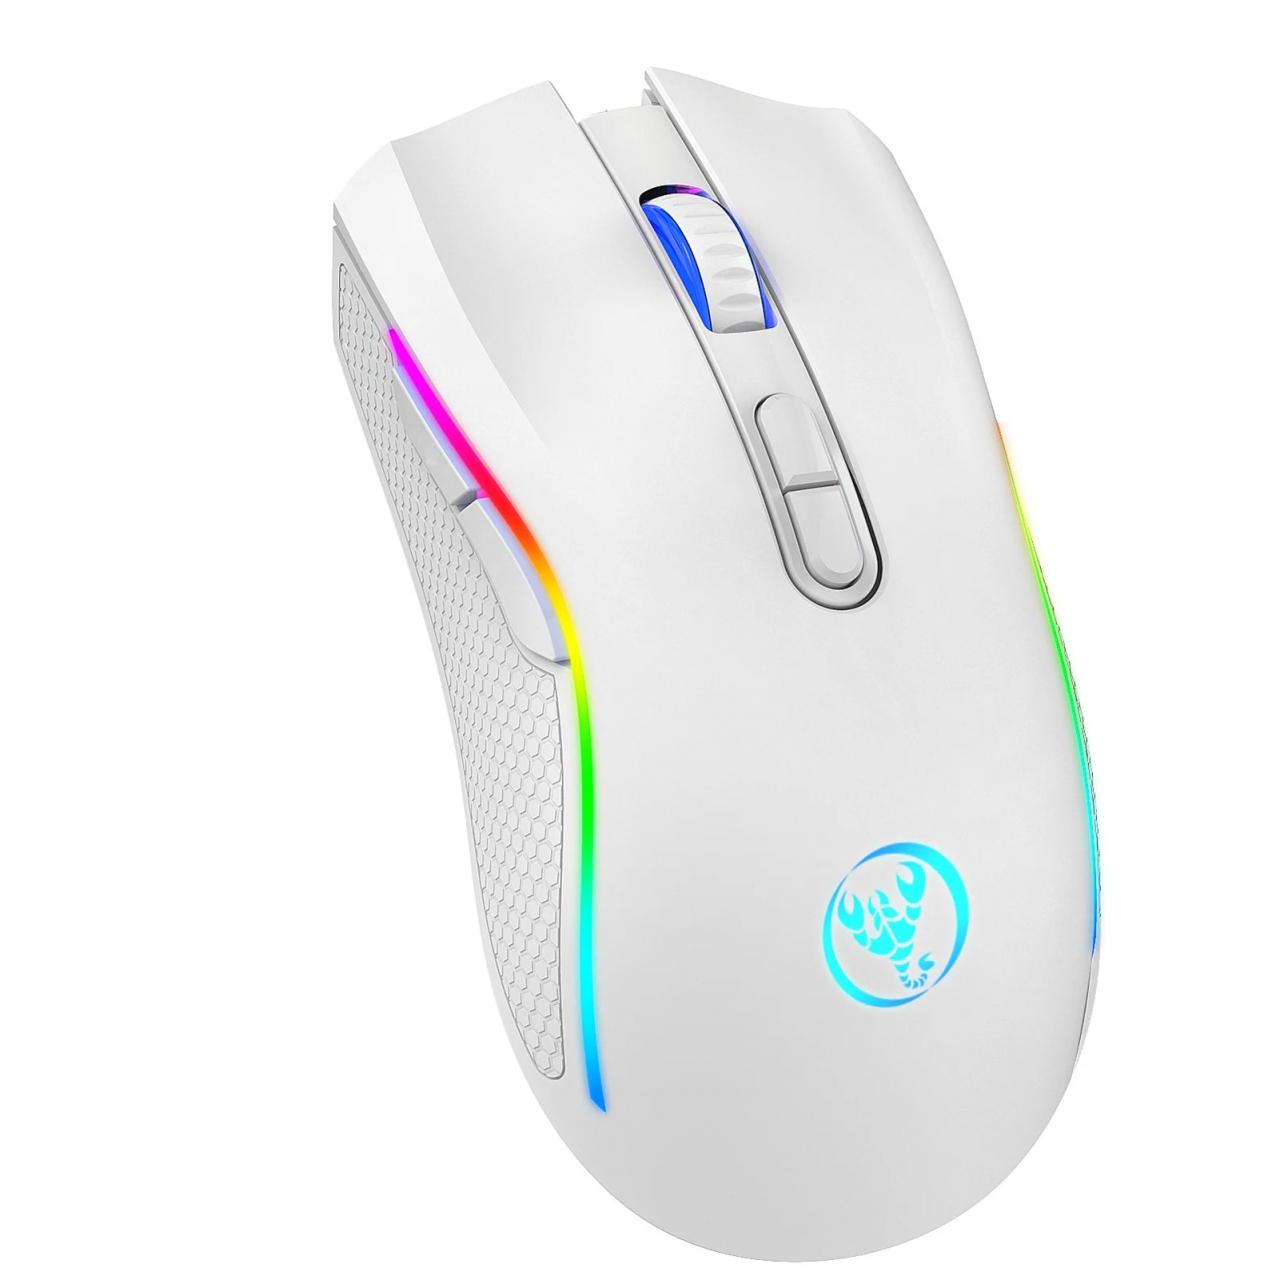 Ergonomic Rgb Gaming Mouse, Wireless, Rechargeable, Lightweight